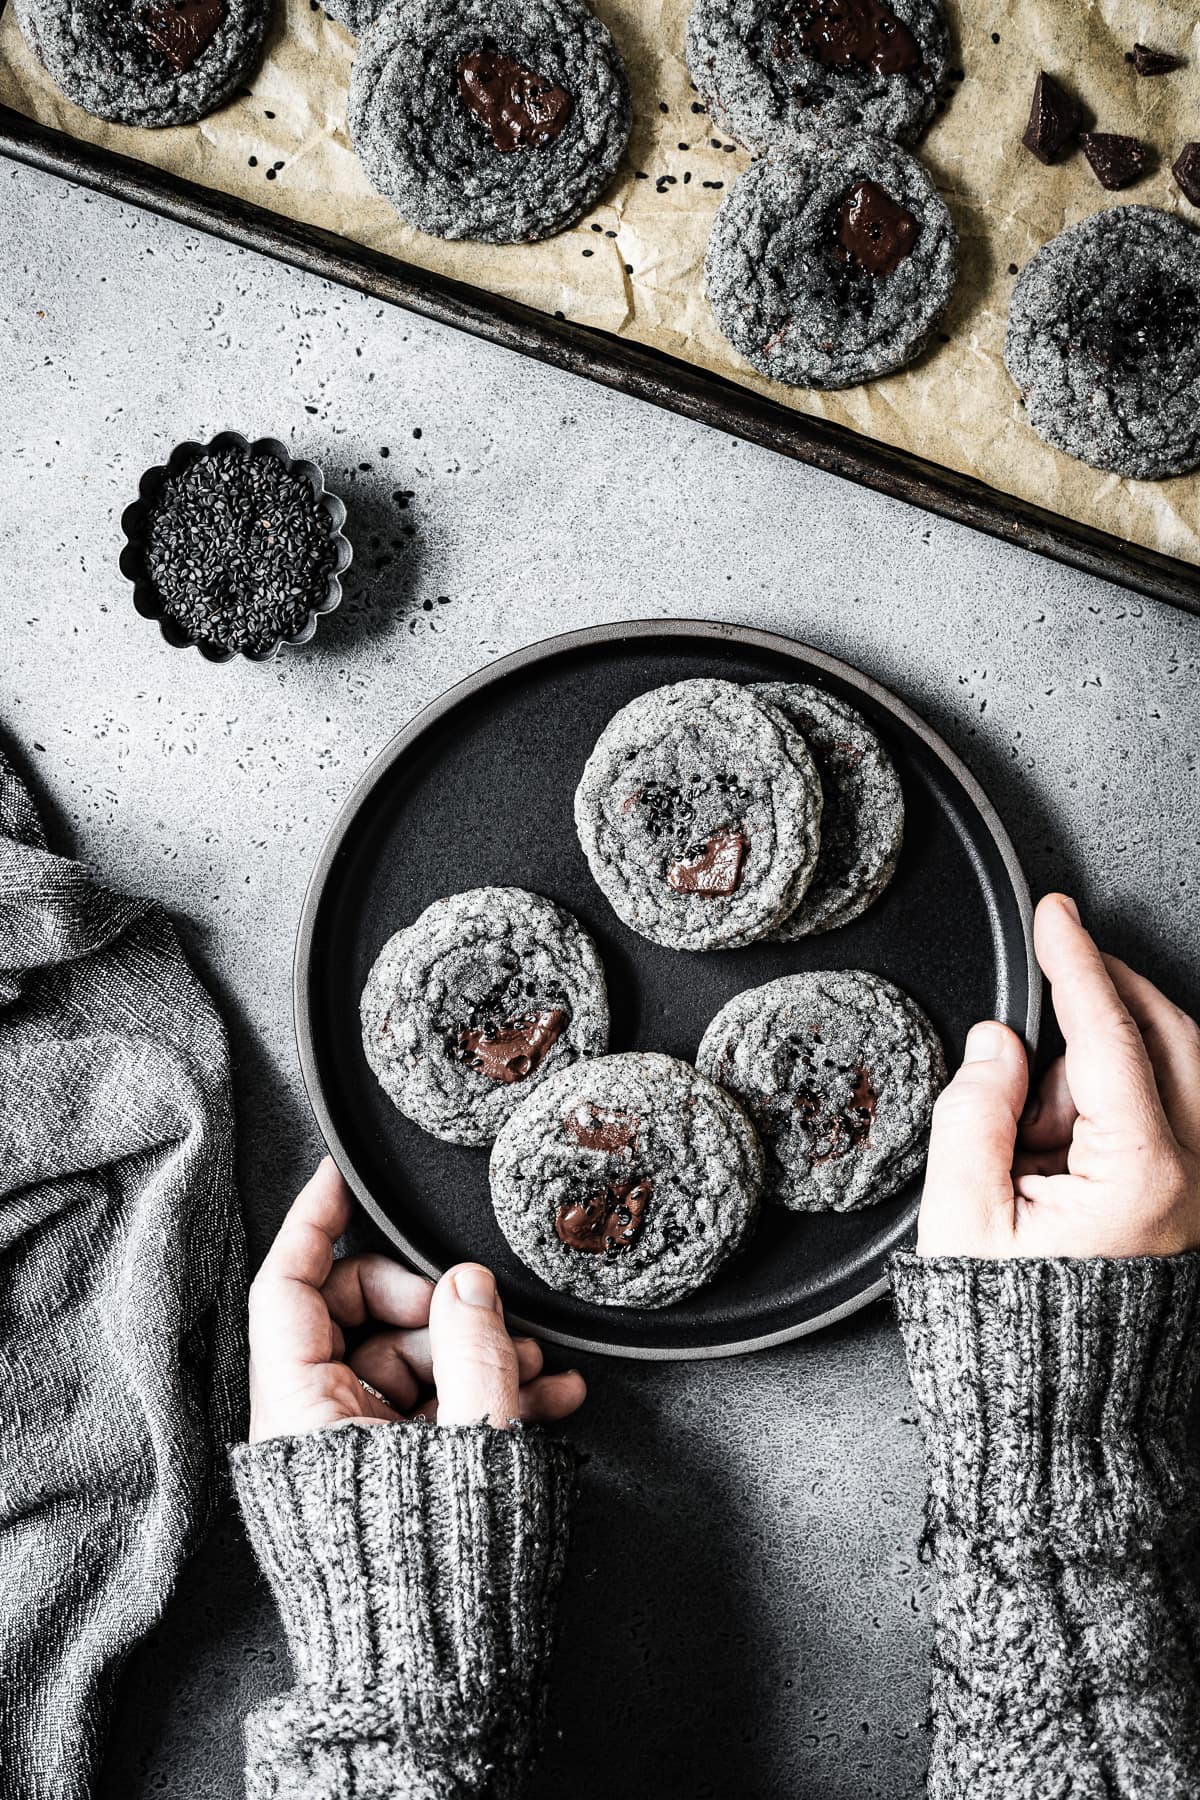 Arms in a grey sweater reach into the frame to hold a black plate of cookies. The colors in the image are monochromatic: grey, black and brown. The sweater color and texture matches the grey stone background and the color of the cookies.